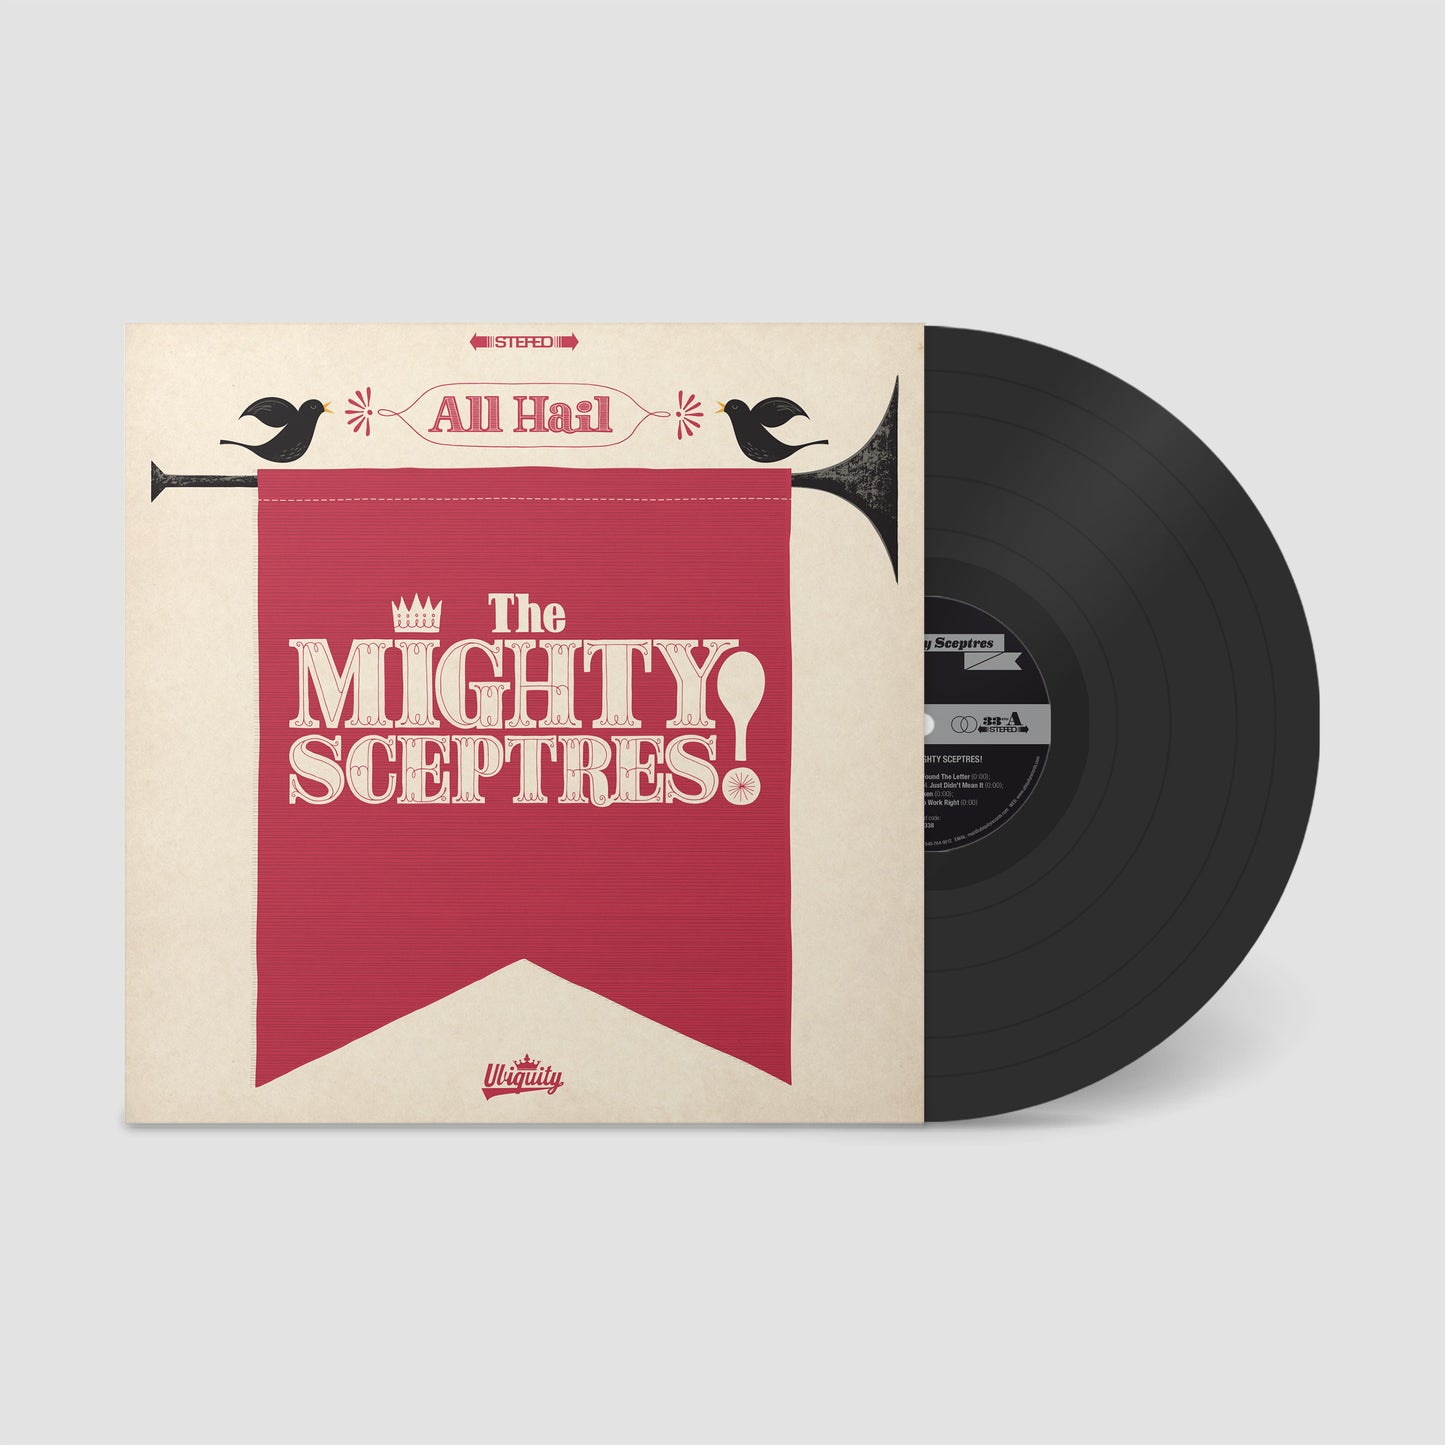 The Mighty Sceptres "All Hail The Mighty Sceptres!" LP